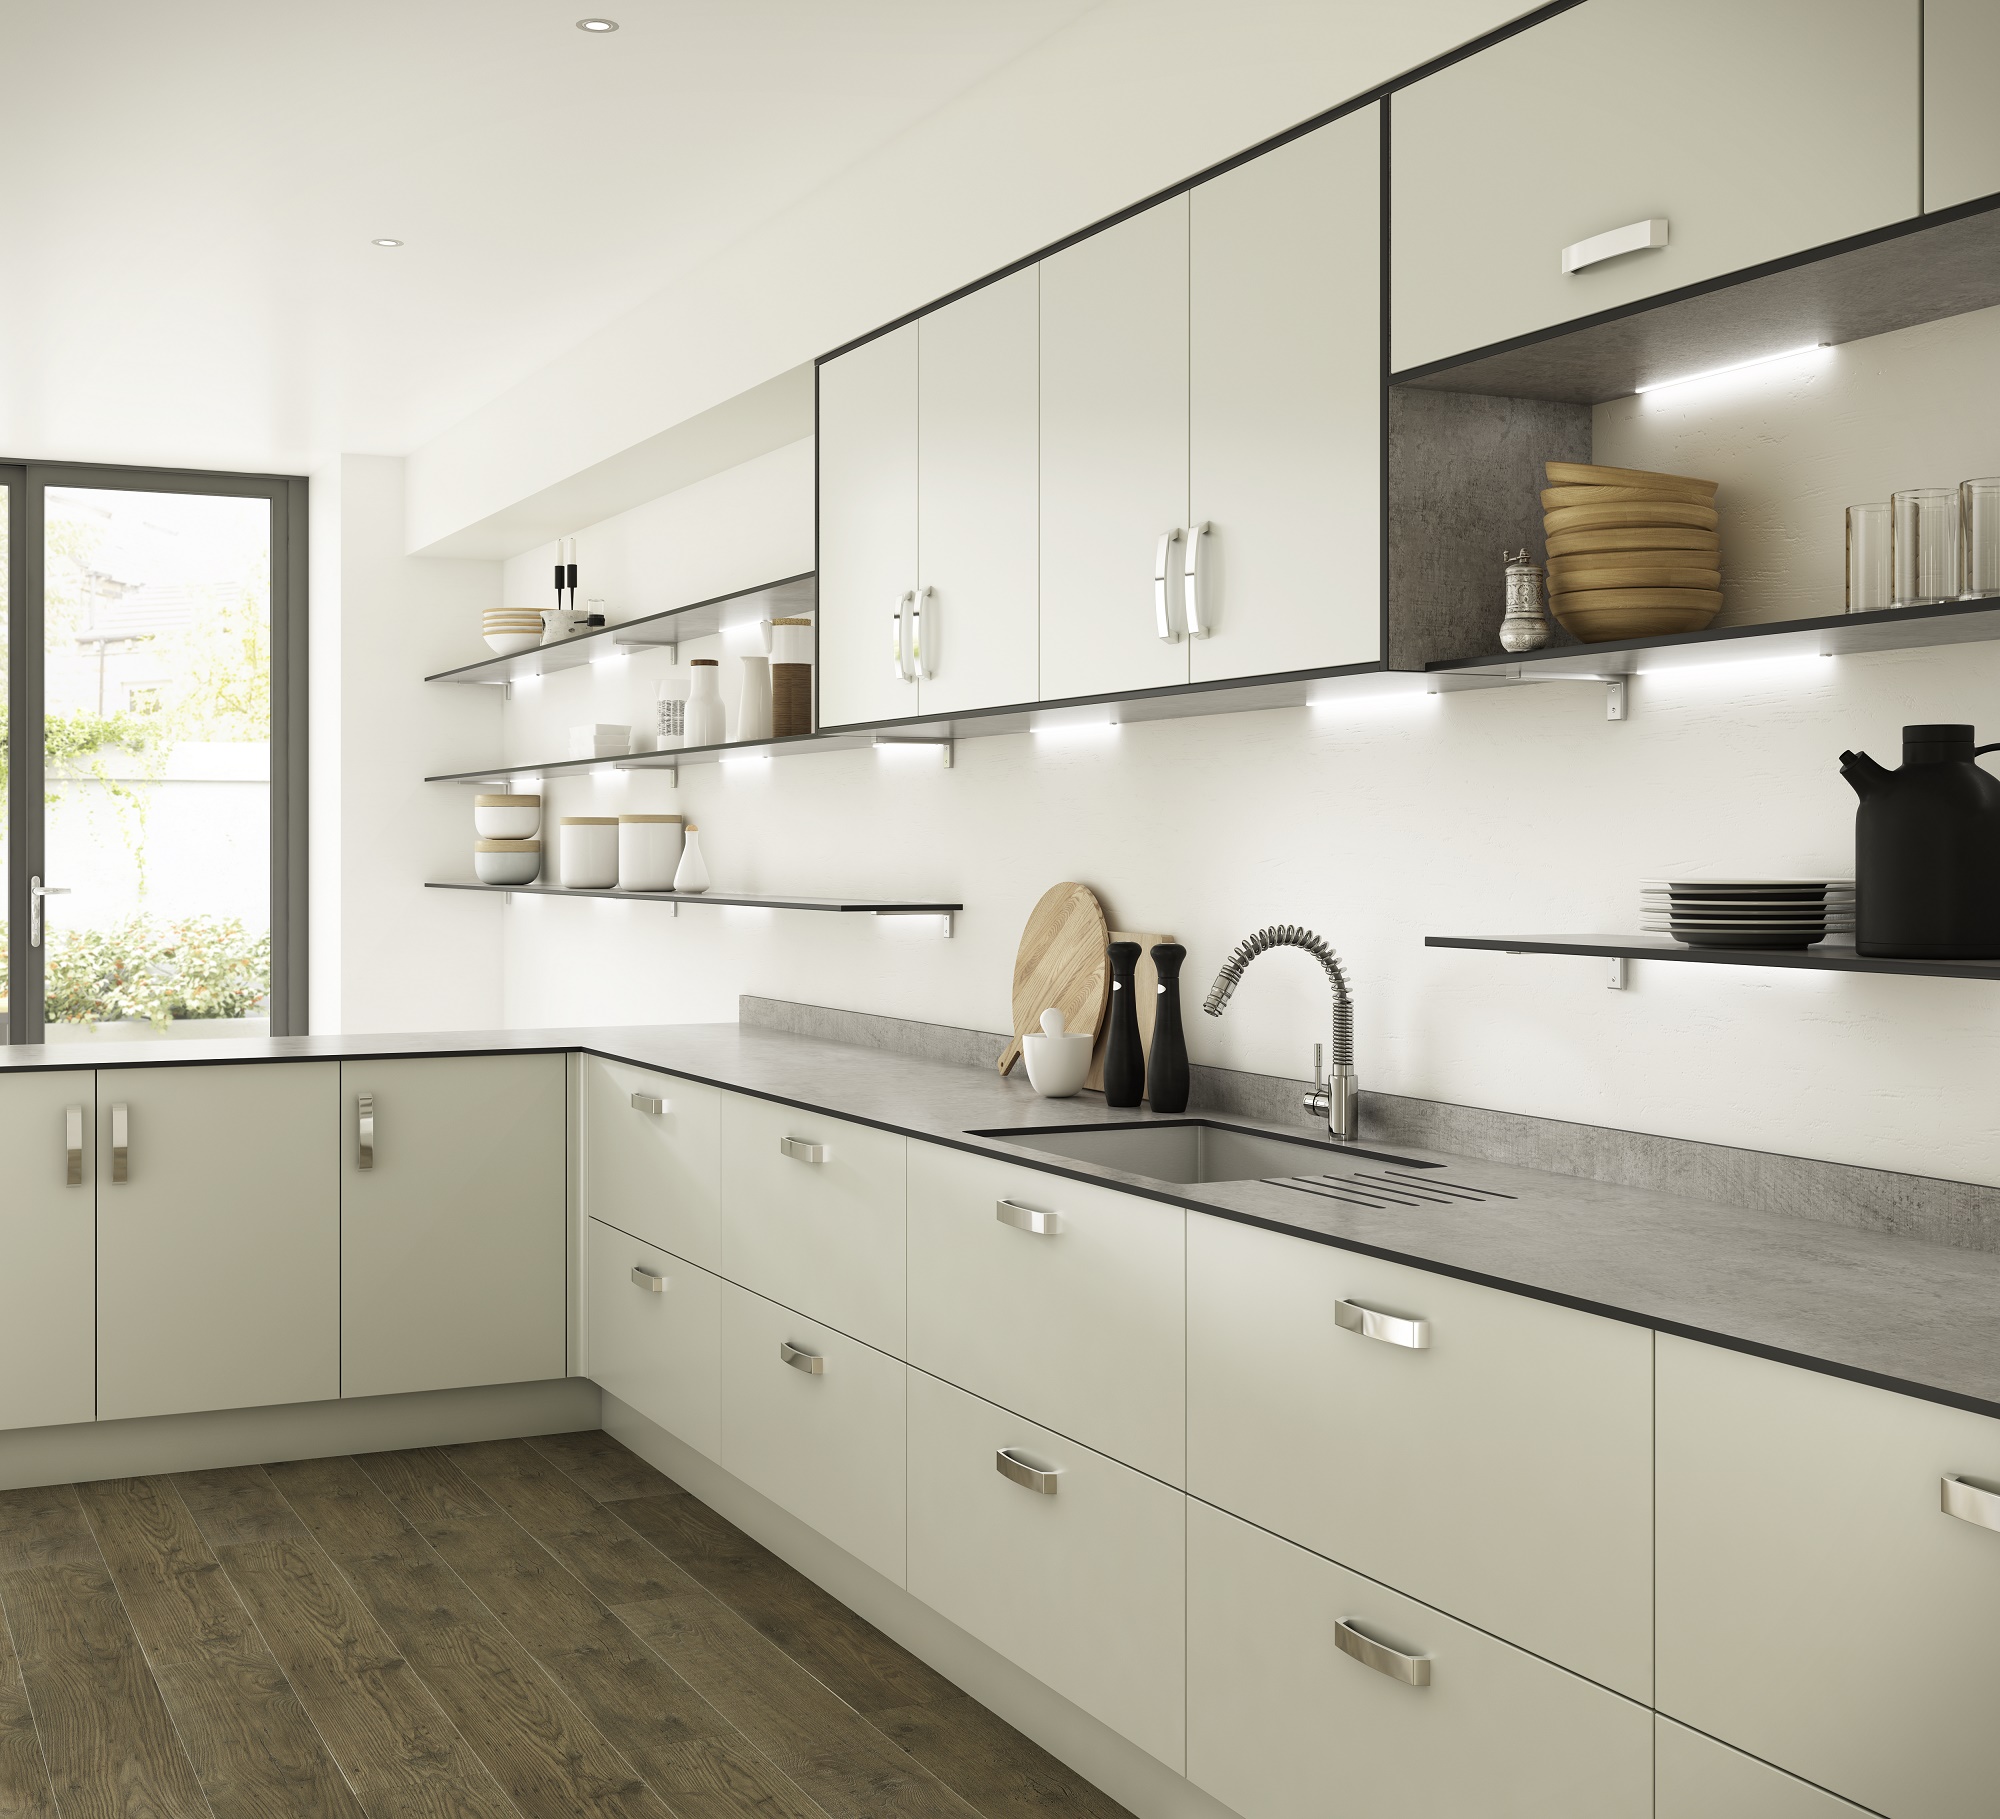 Building in Style with Solid-Core Worktops